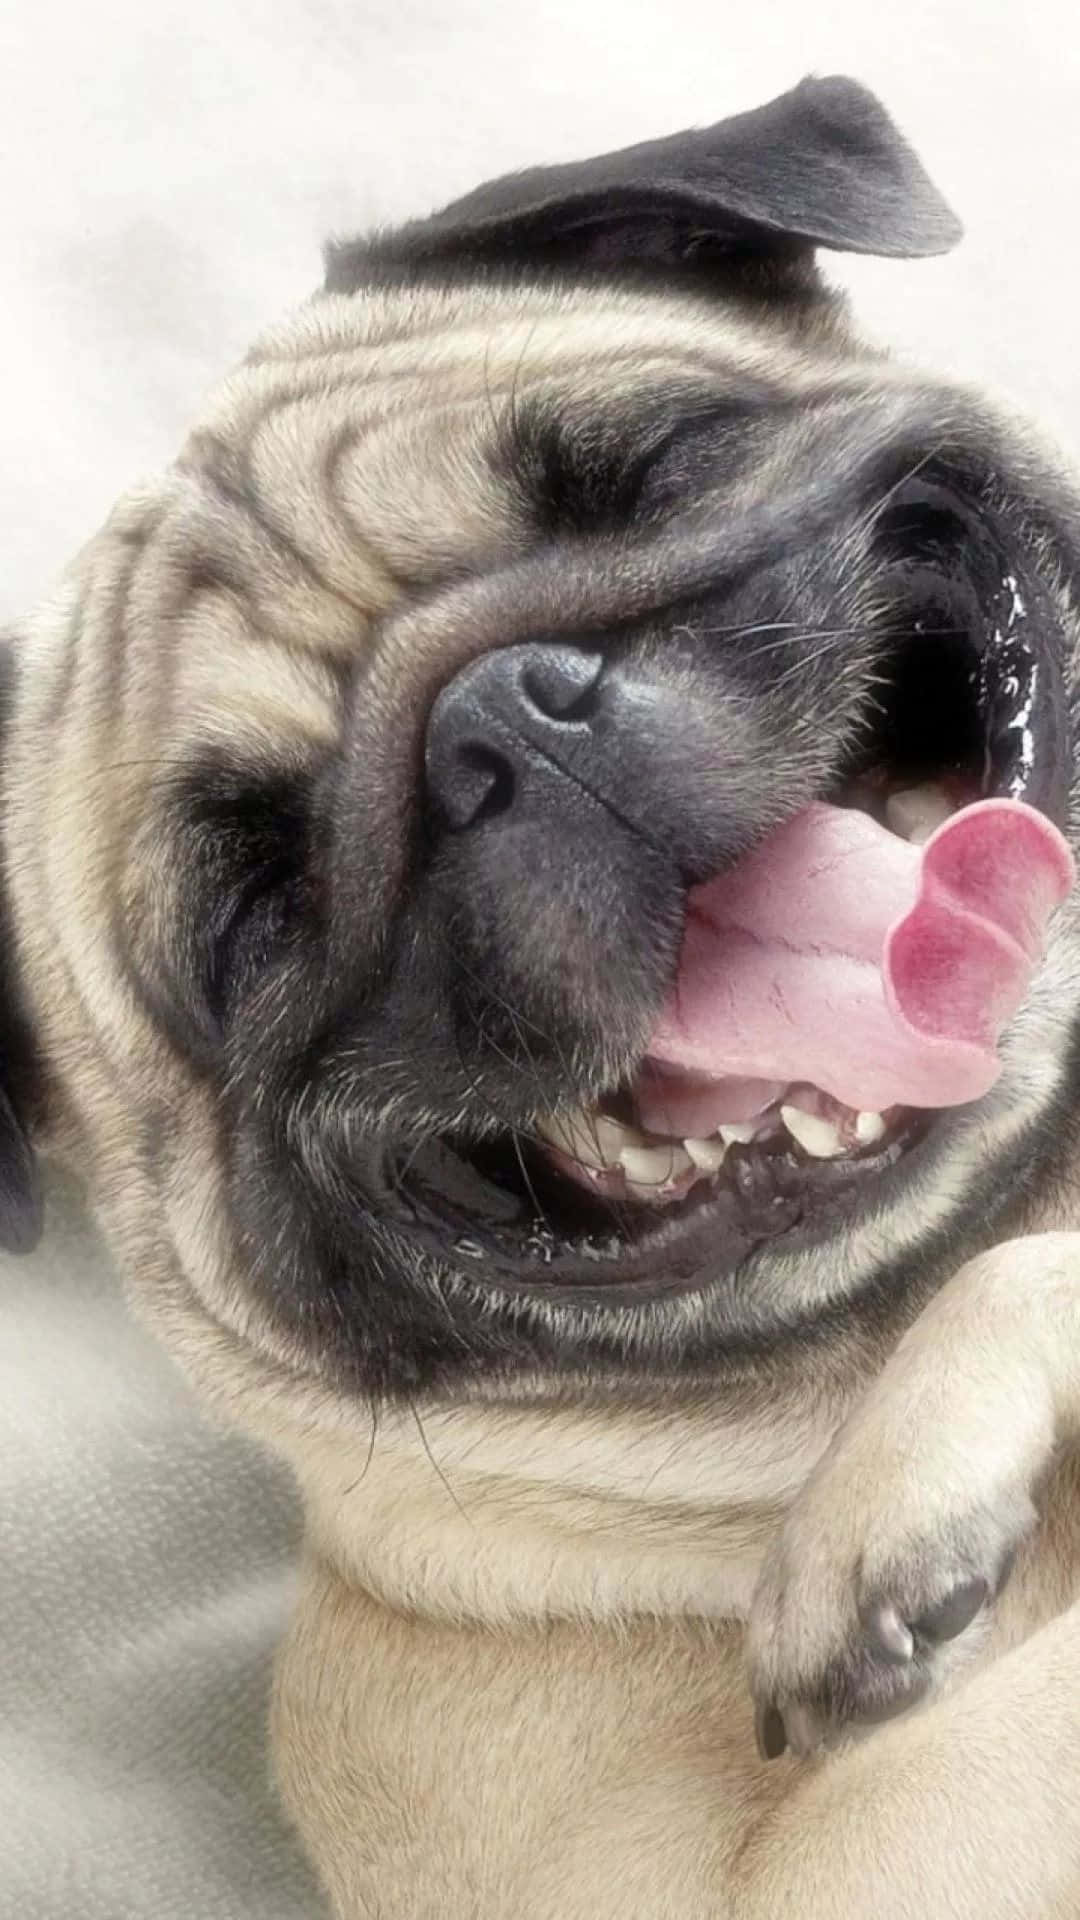 A sweet little pug pup, looking happy and content. Wallpaper